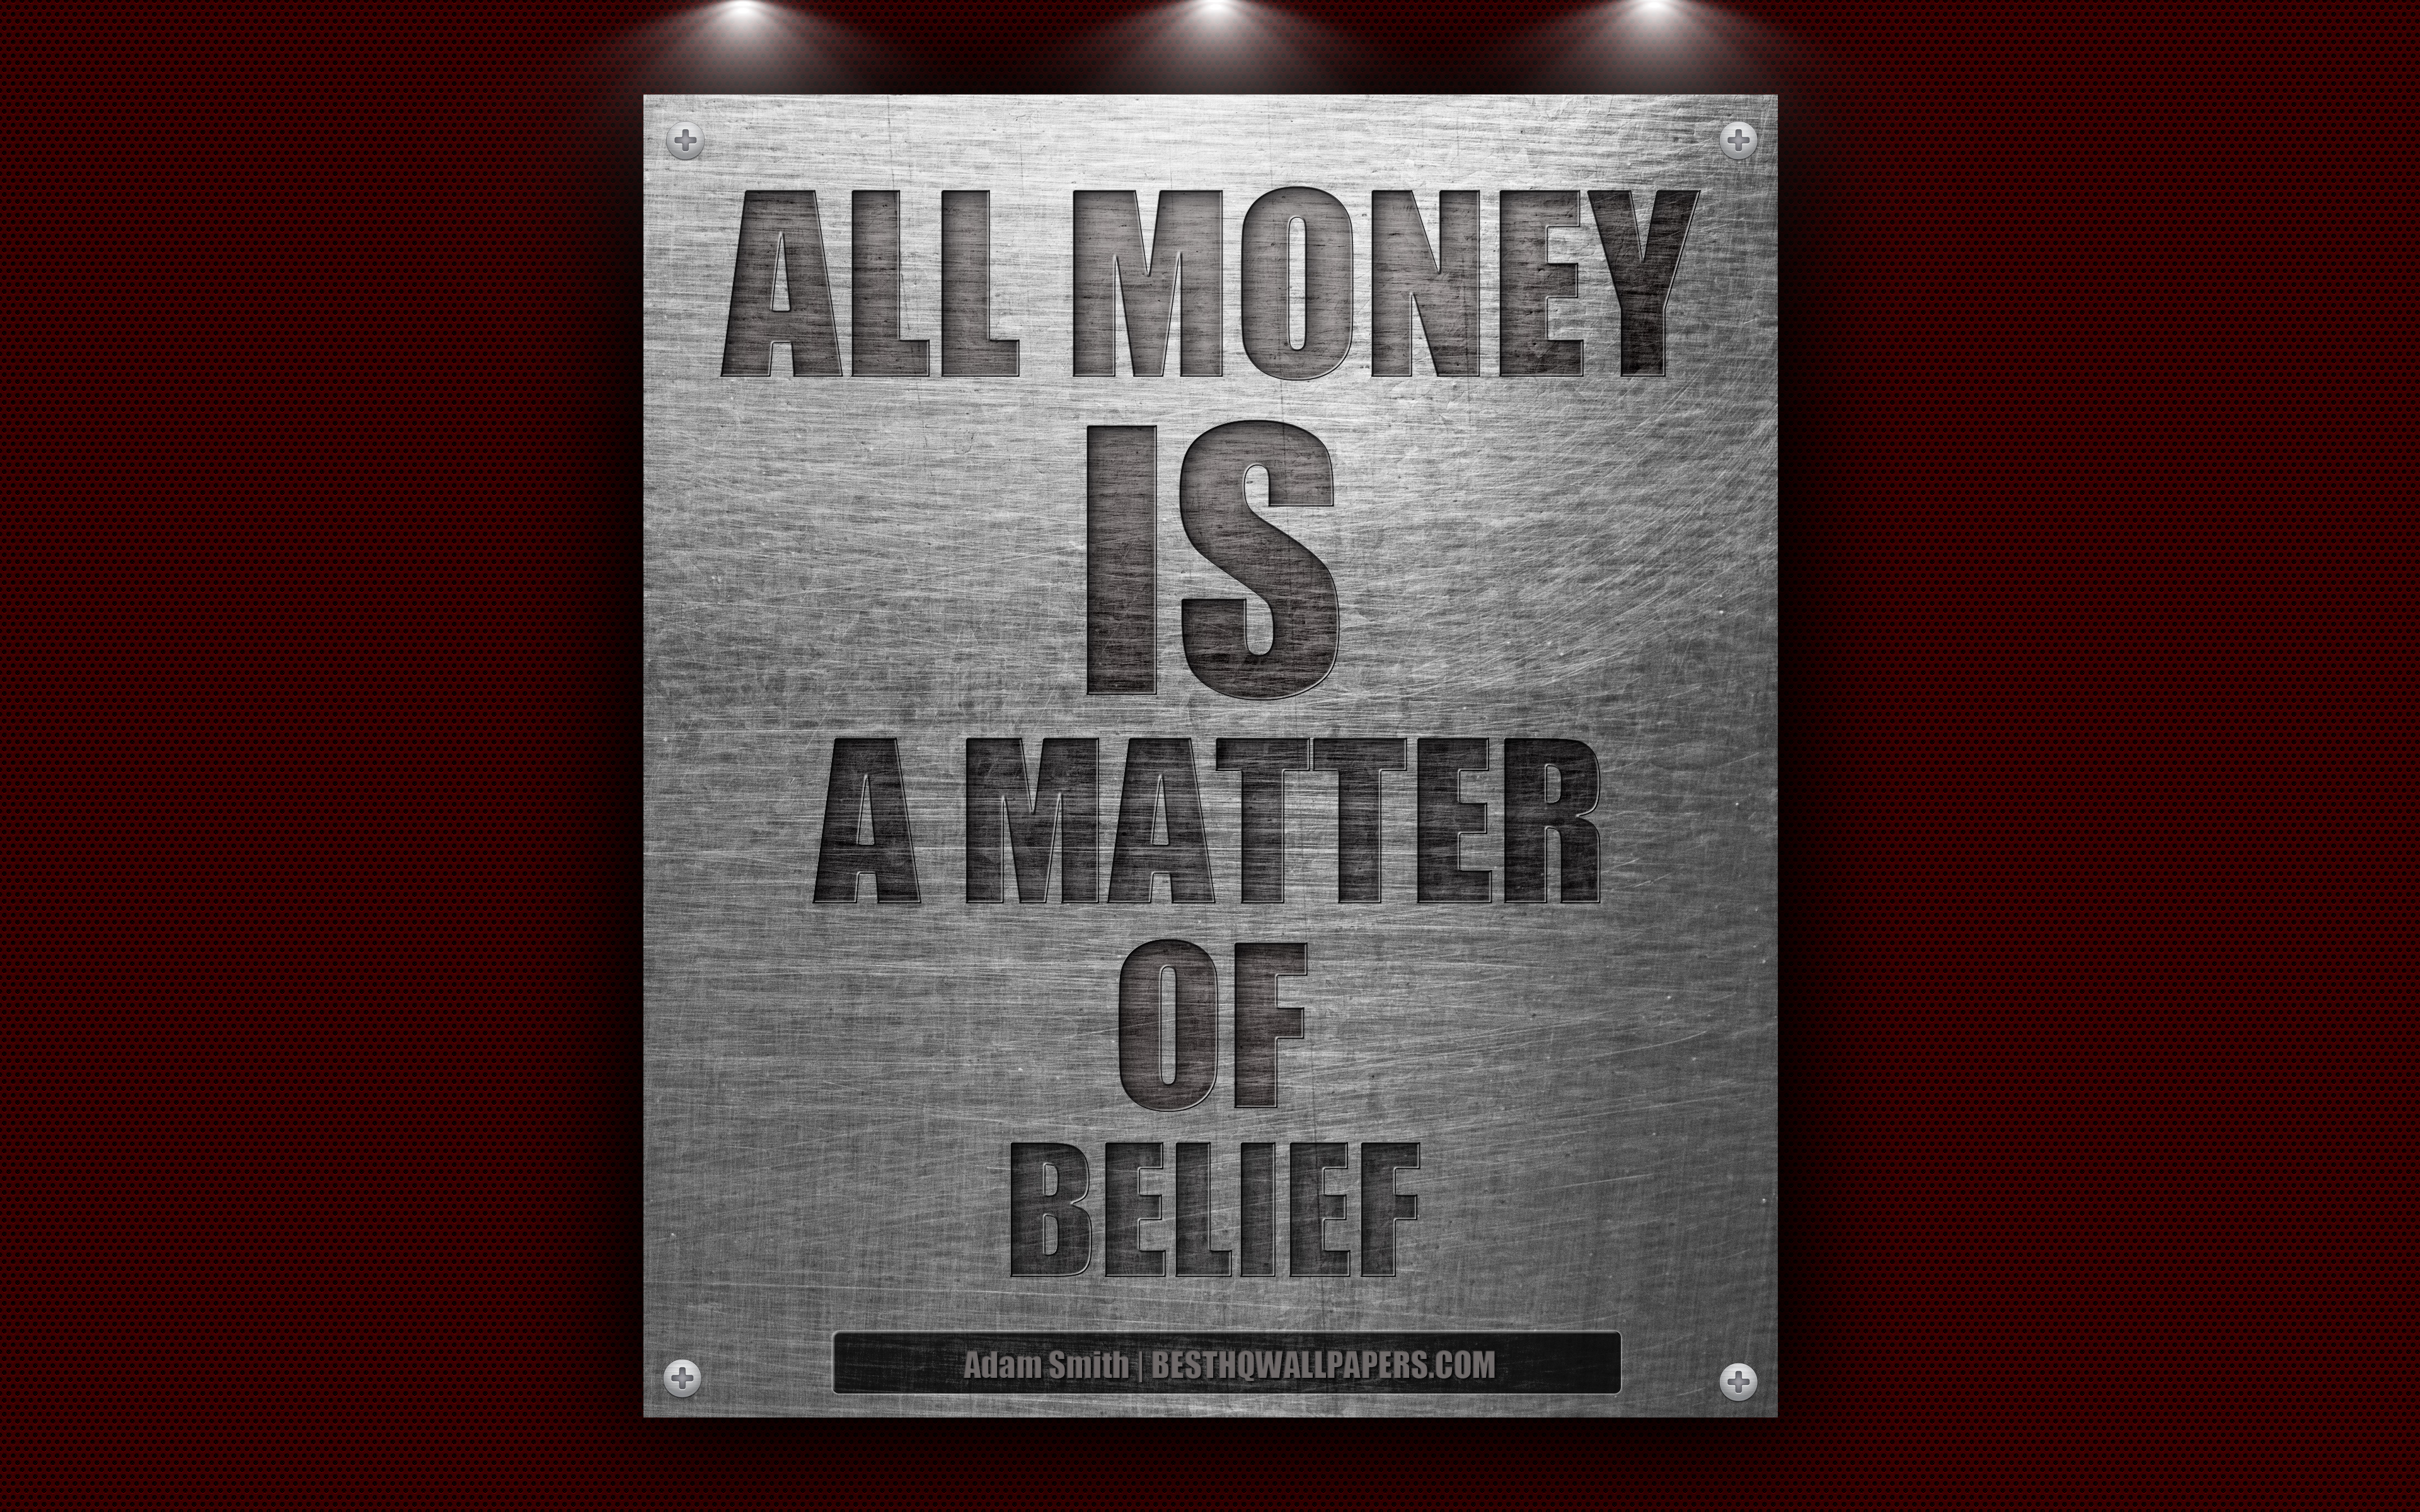 Download wallpaper All money is a matter of belief, Adam Smith quotes, quotes about money, 4k, wallpaper quotes, metal texture for desktop with resolution 3840x2400. High Quality HD picture wallpaper